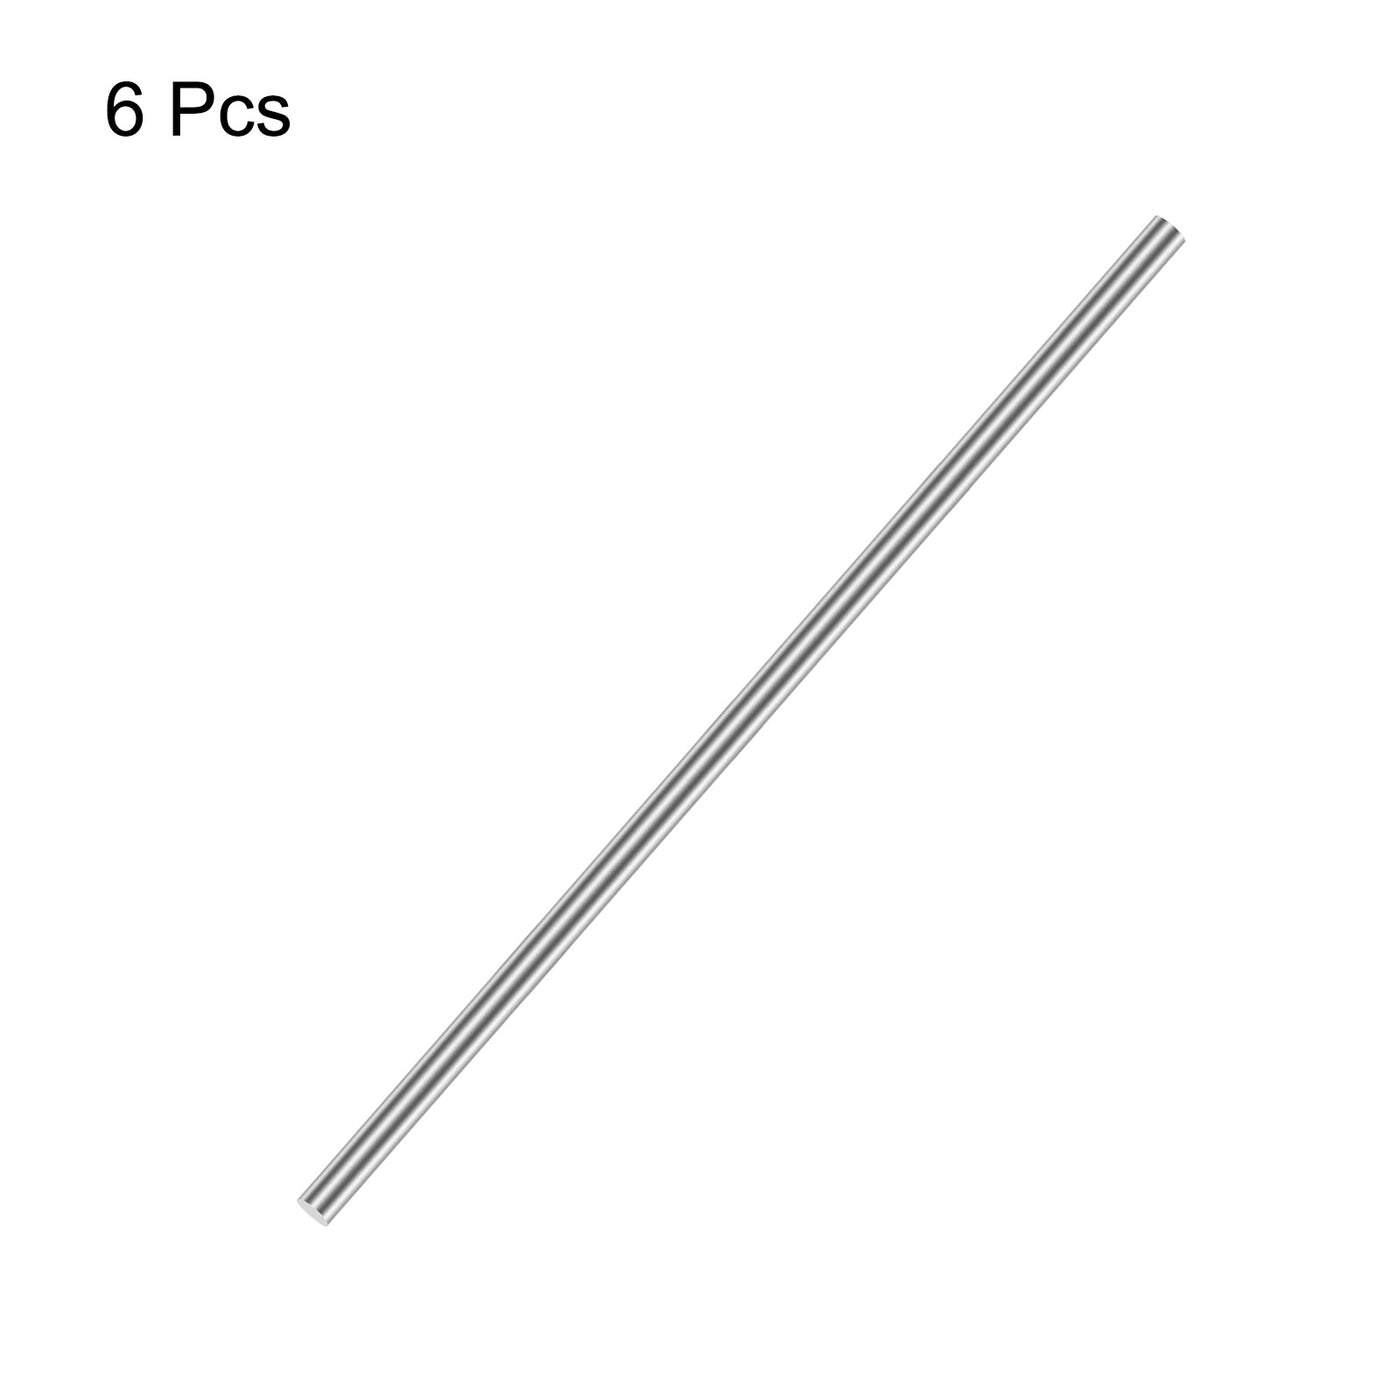 uxcell Uxcell 3mm x 150mm(1/8" x 6") 304 Stainless Steel Solid Round Rod for DIY Craft - 6pcs